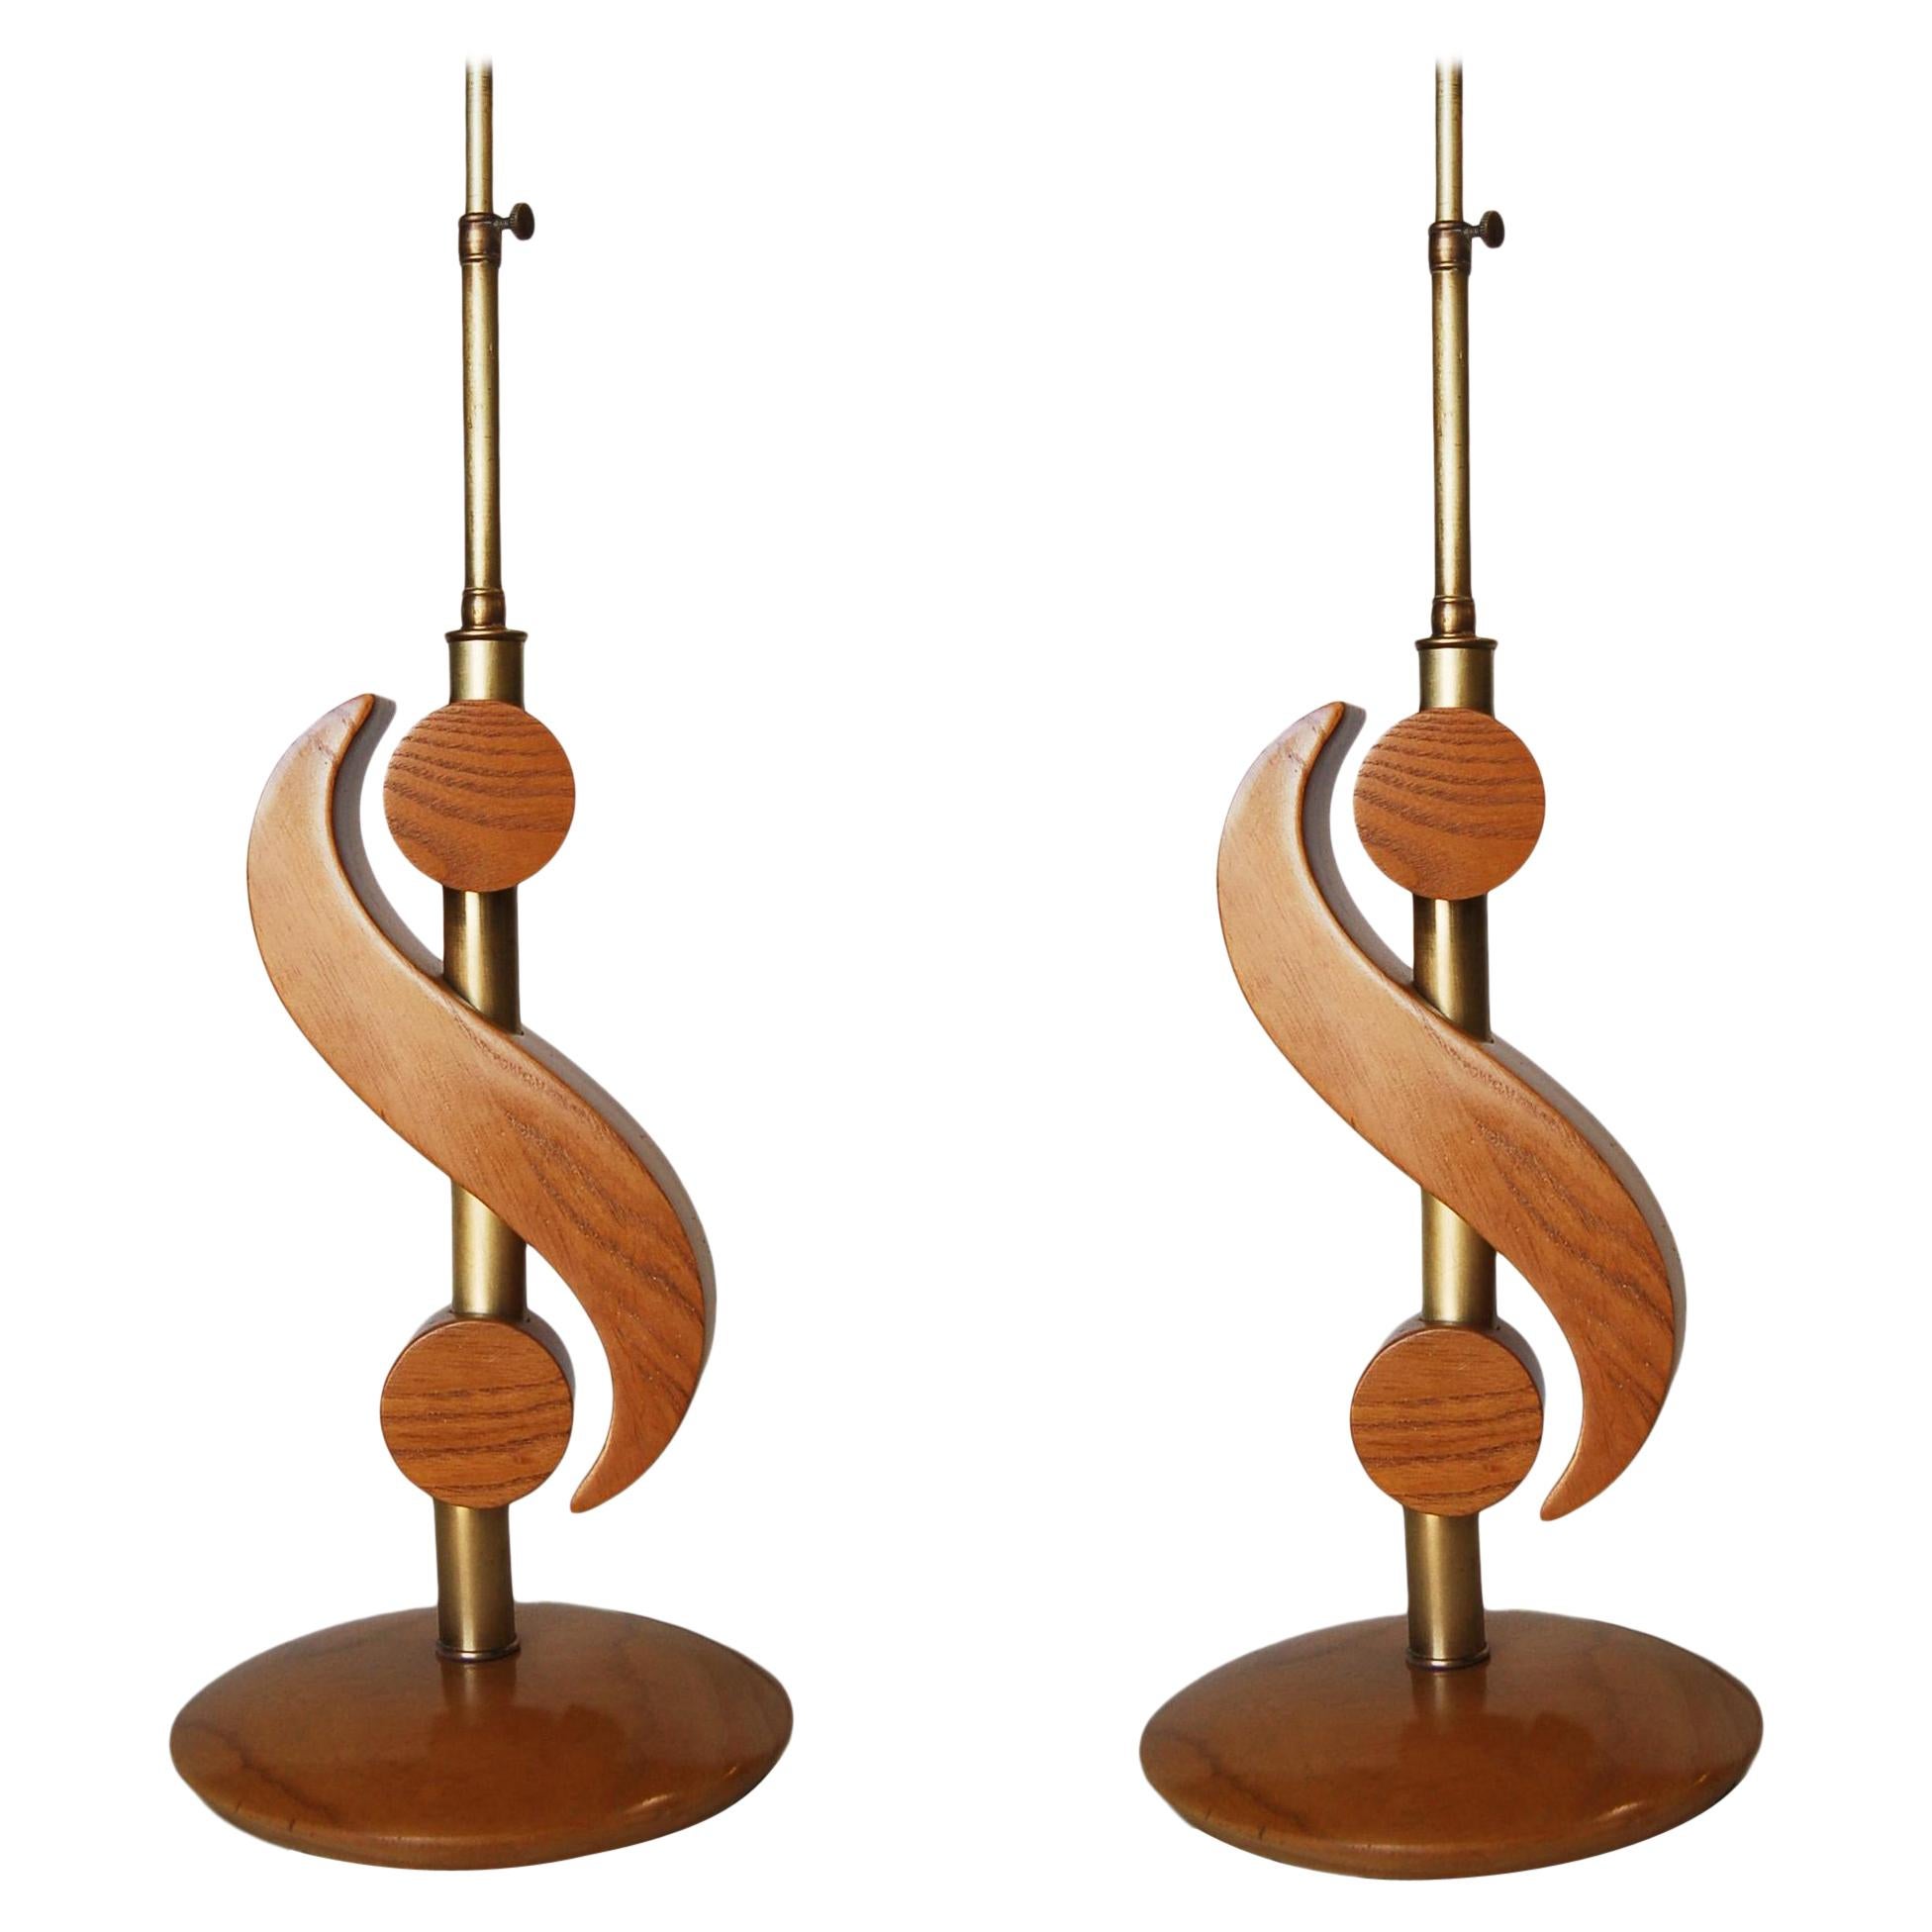 Carved Oak and Brass Biomorphic Modernist Table Lamp, Pair